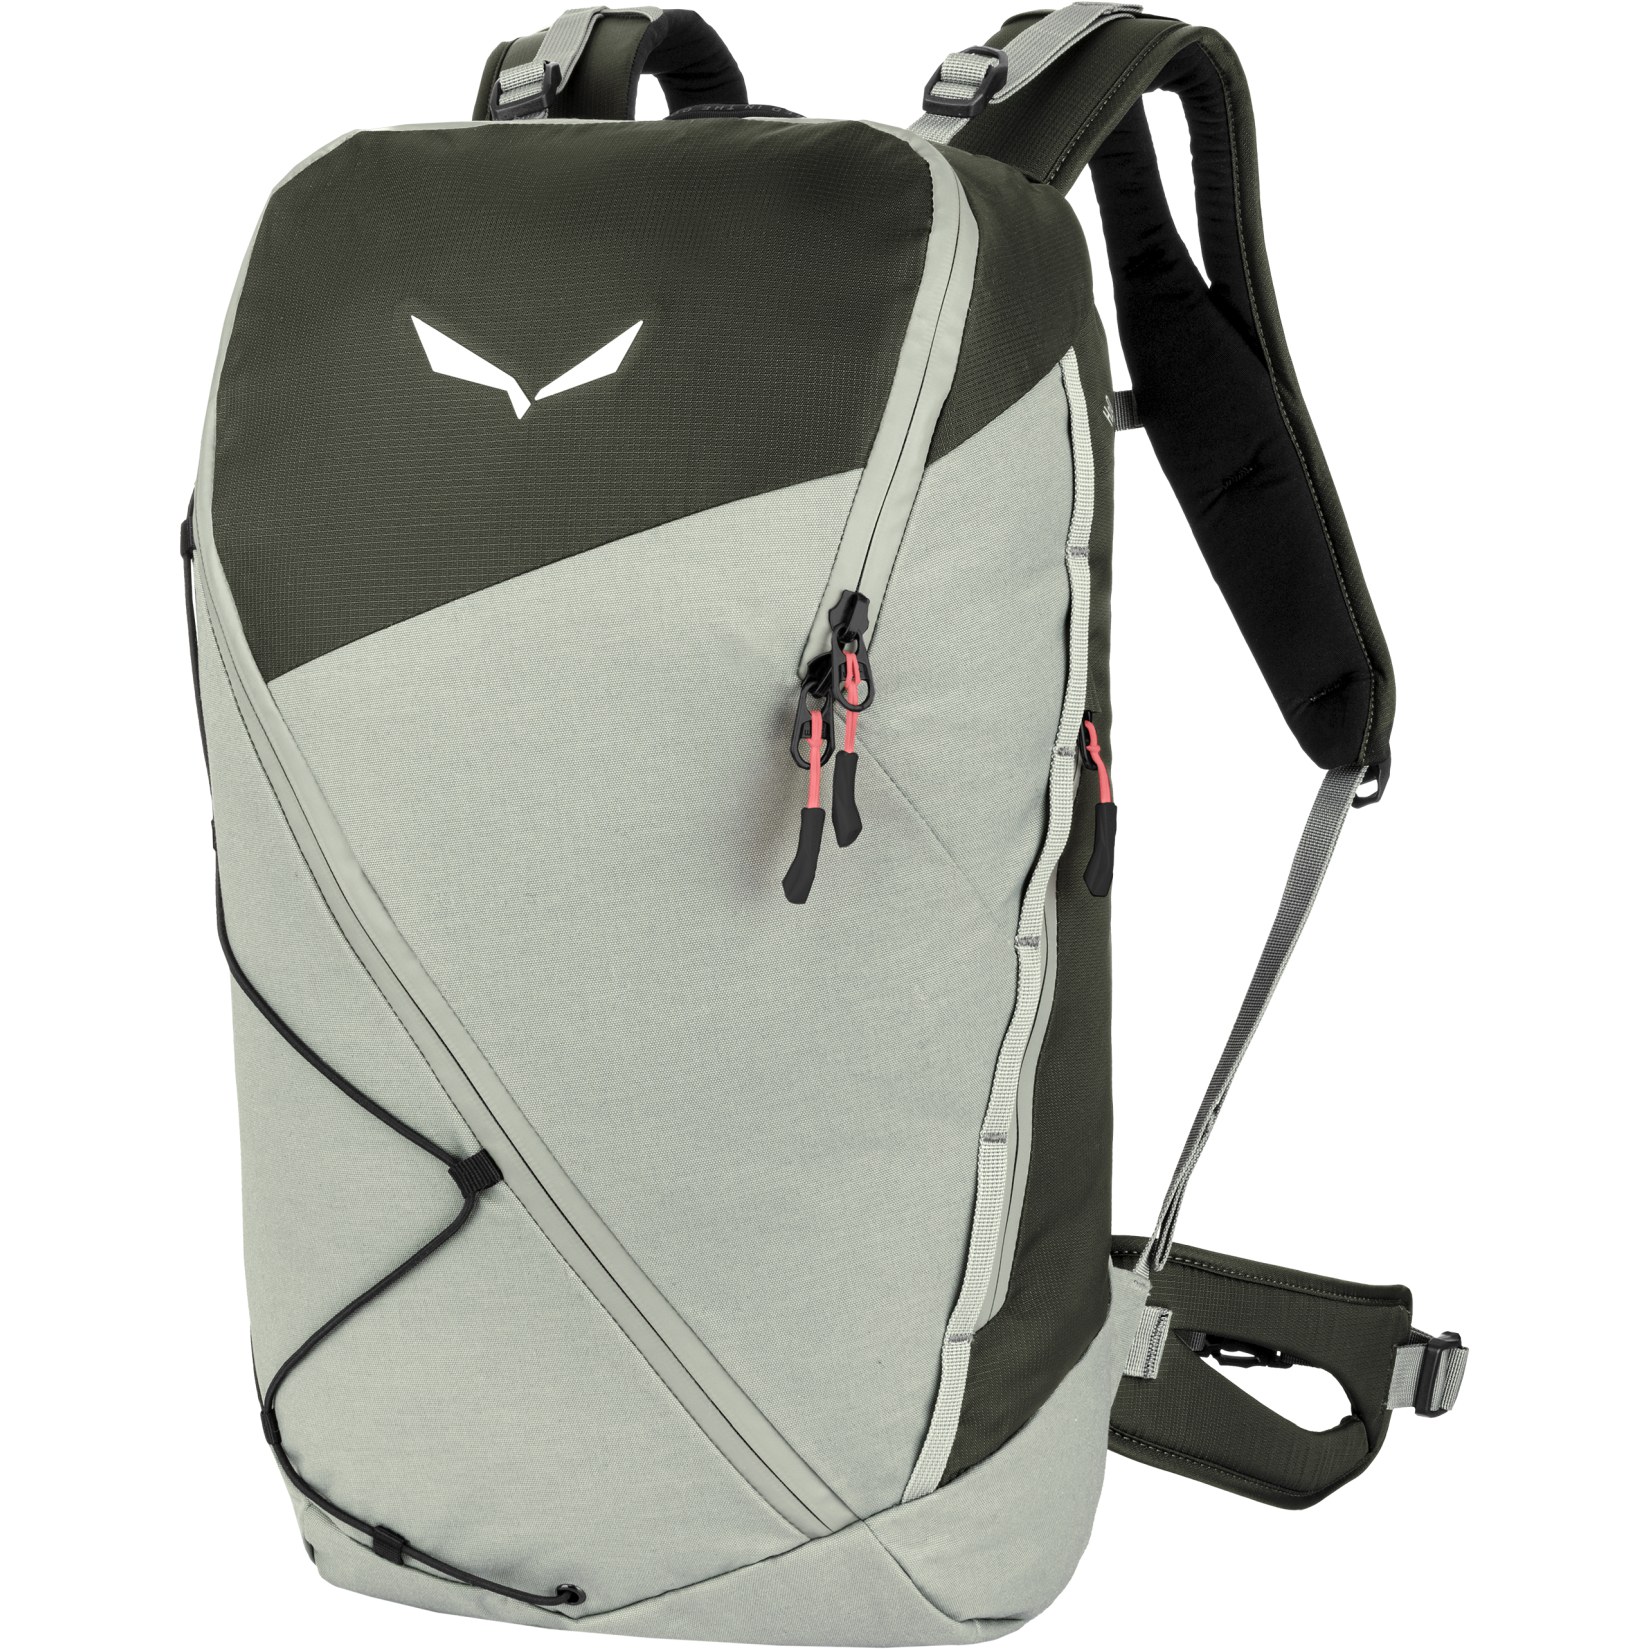 Picture of Salewa Puez 25L Backpack - shadow/dark olive 5136